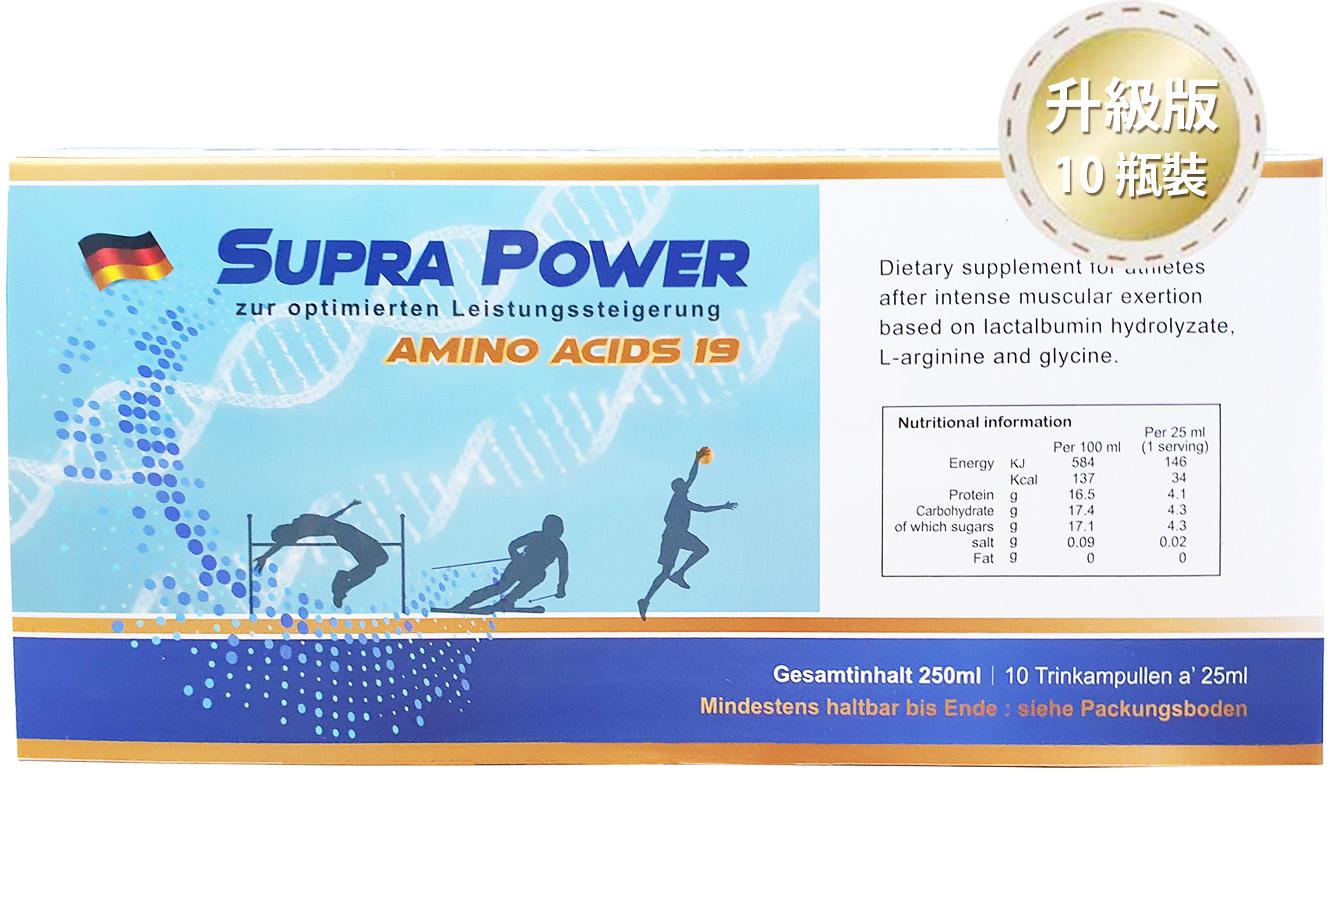 Germany Imported : SUPRA POWER Amino Acids (19 kinds of High Purity Amino Acids)(25ml×10 bottles/box)